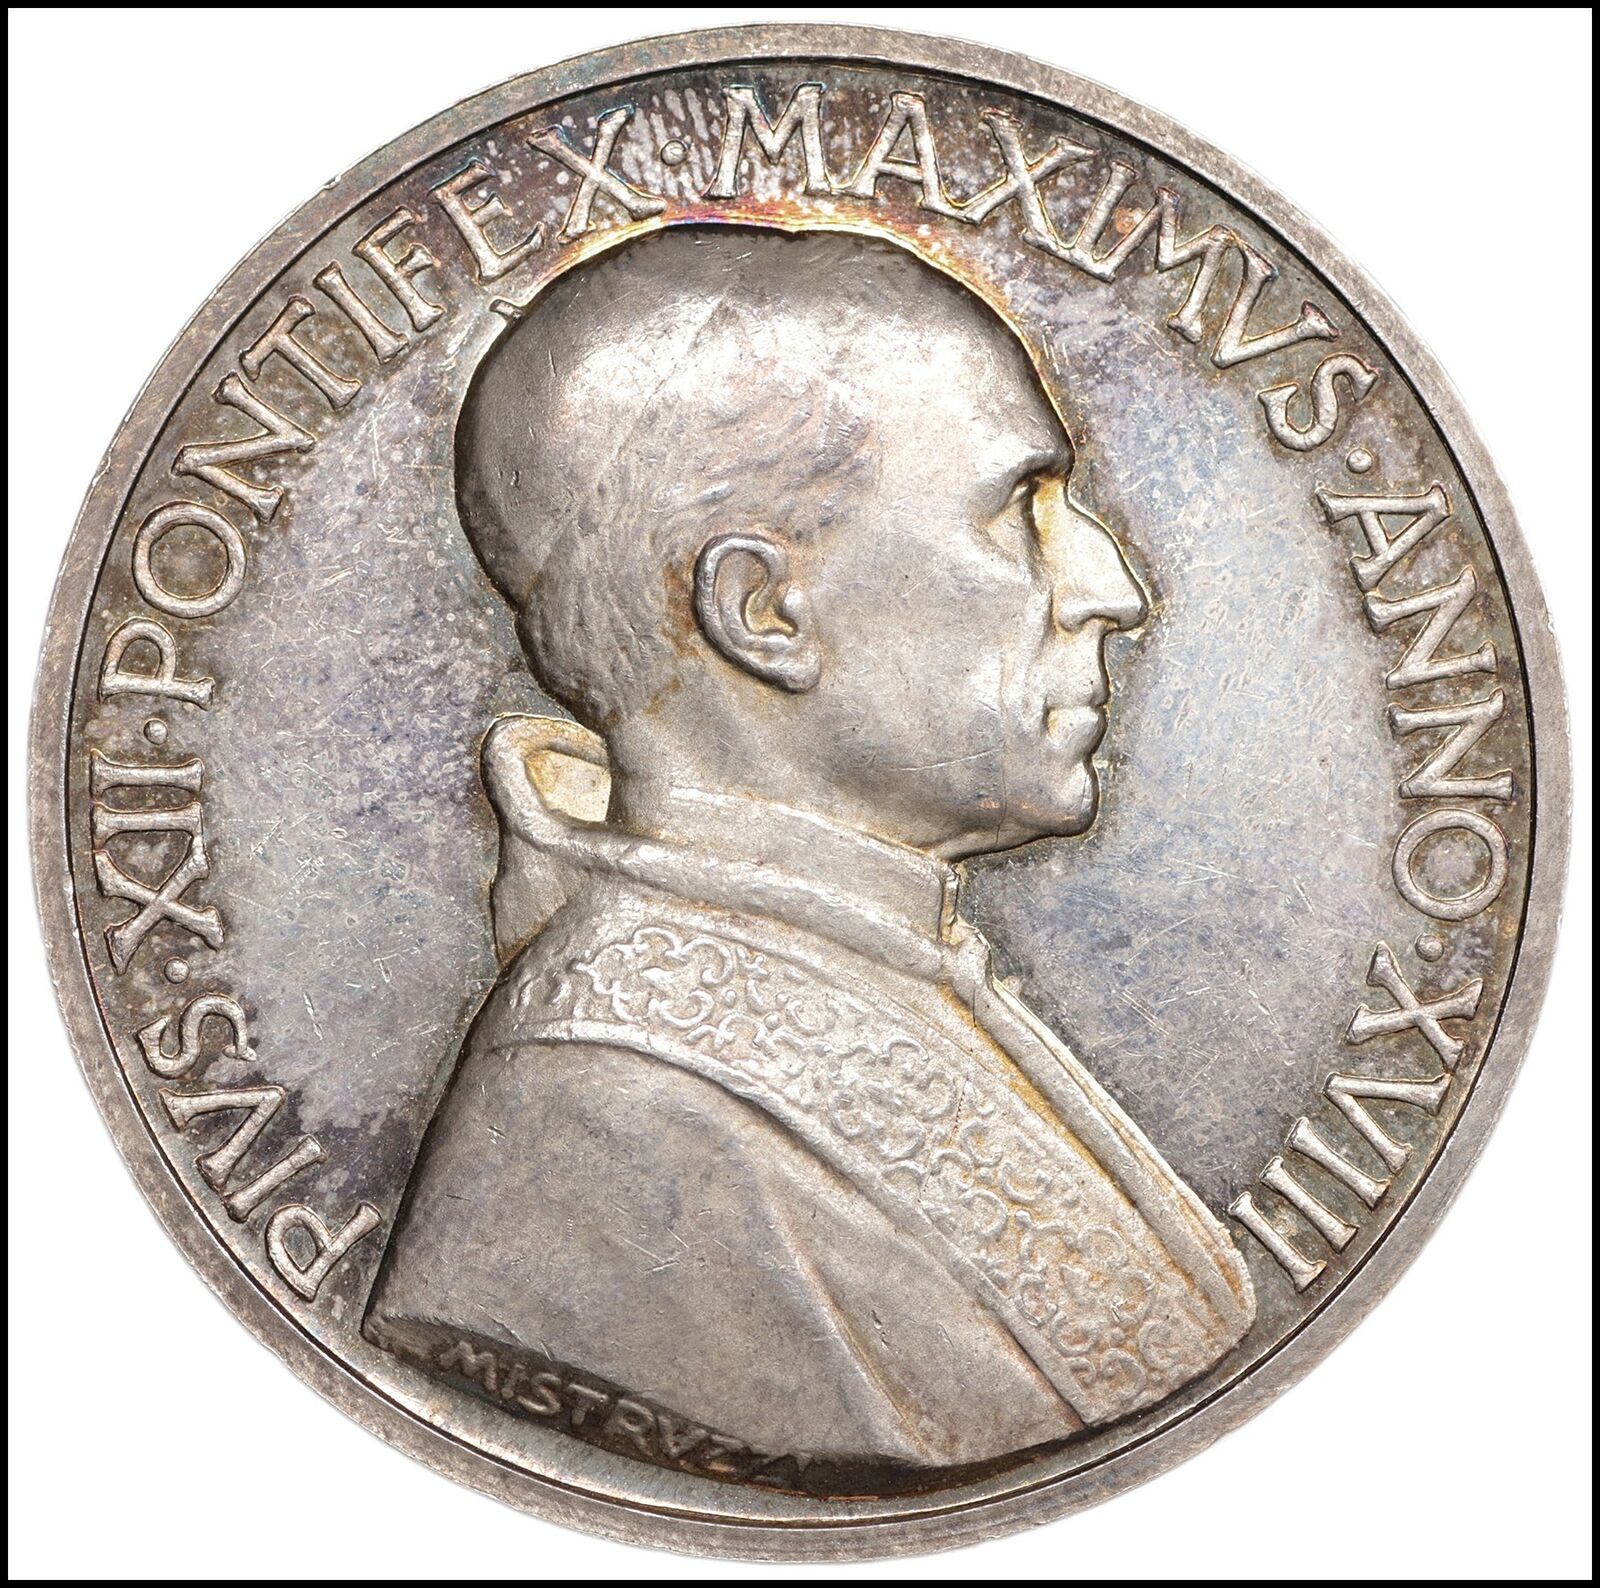 Pope Pius XII Silver Medal 1955 Vatican Papal States Original Rome Rare edition 